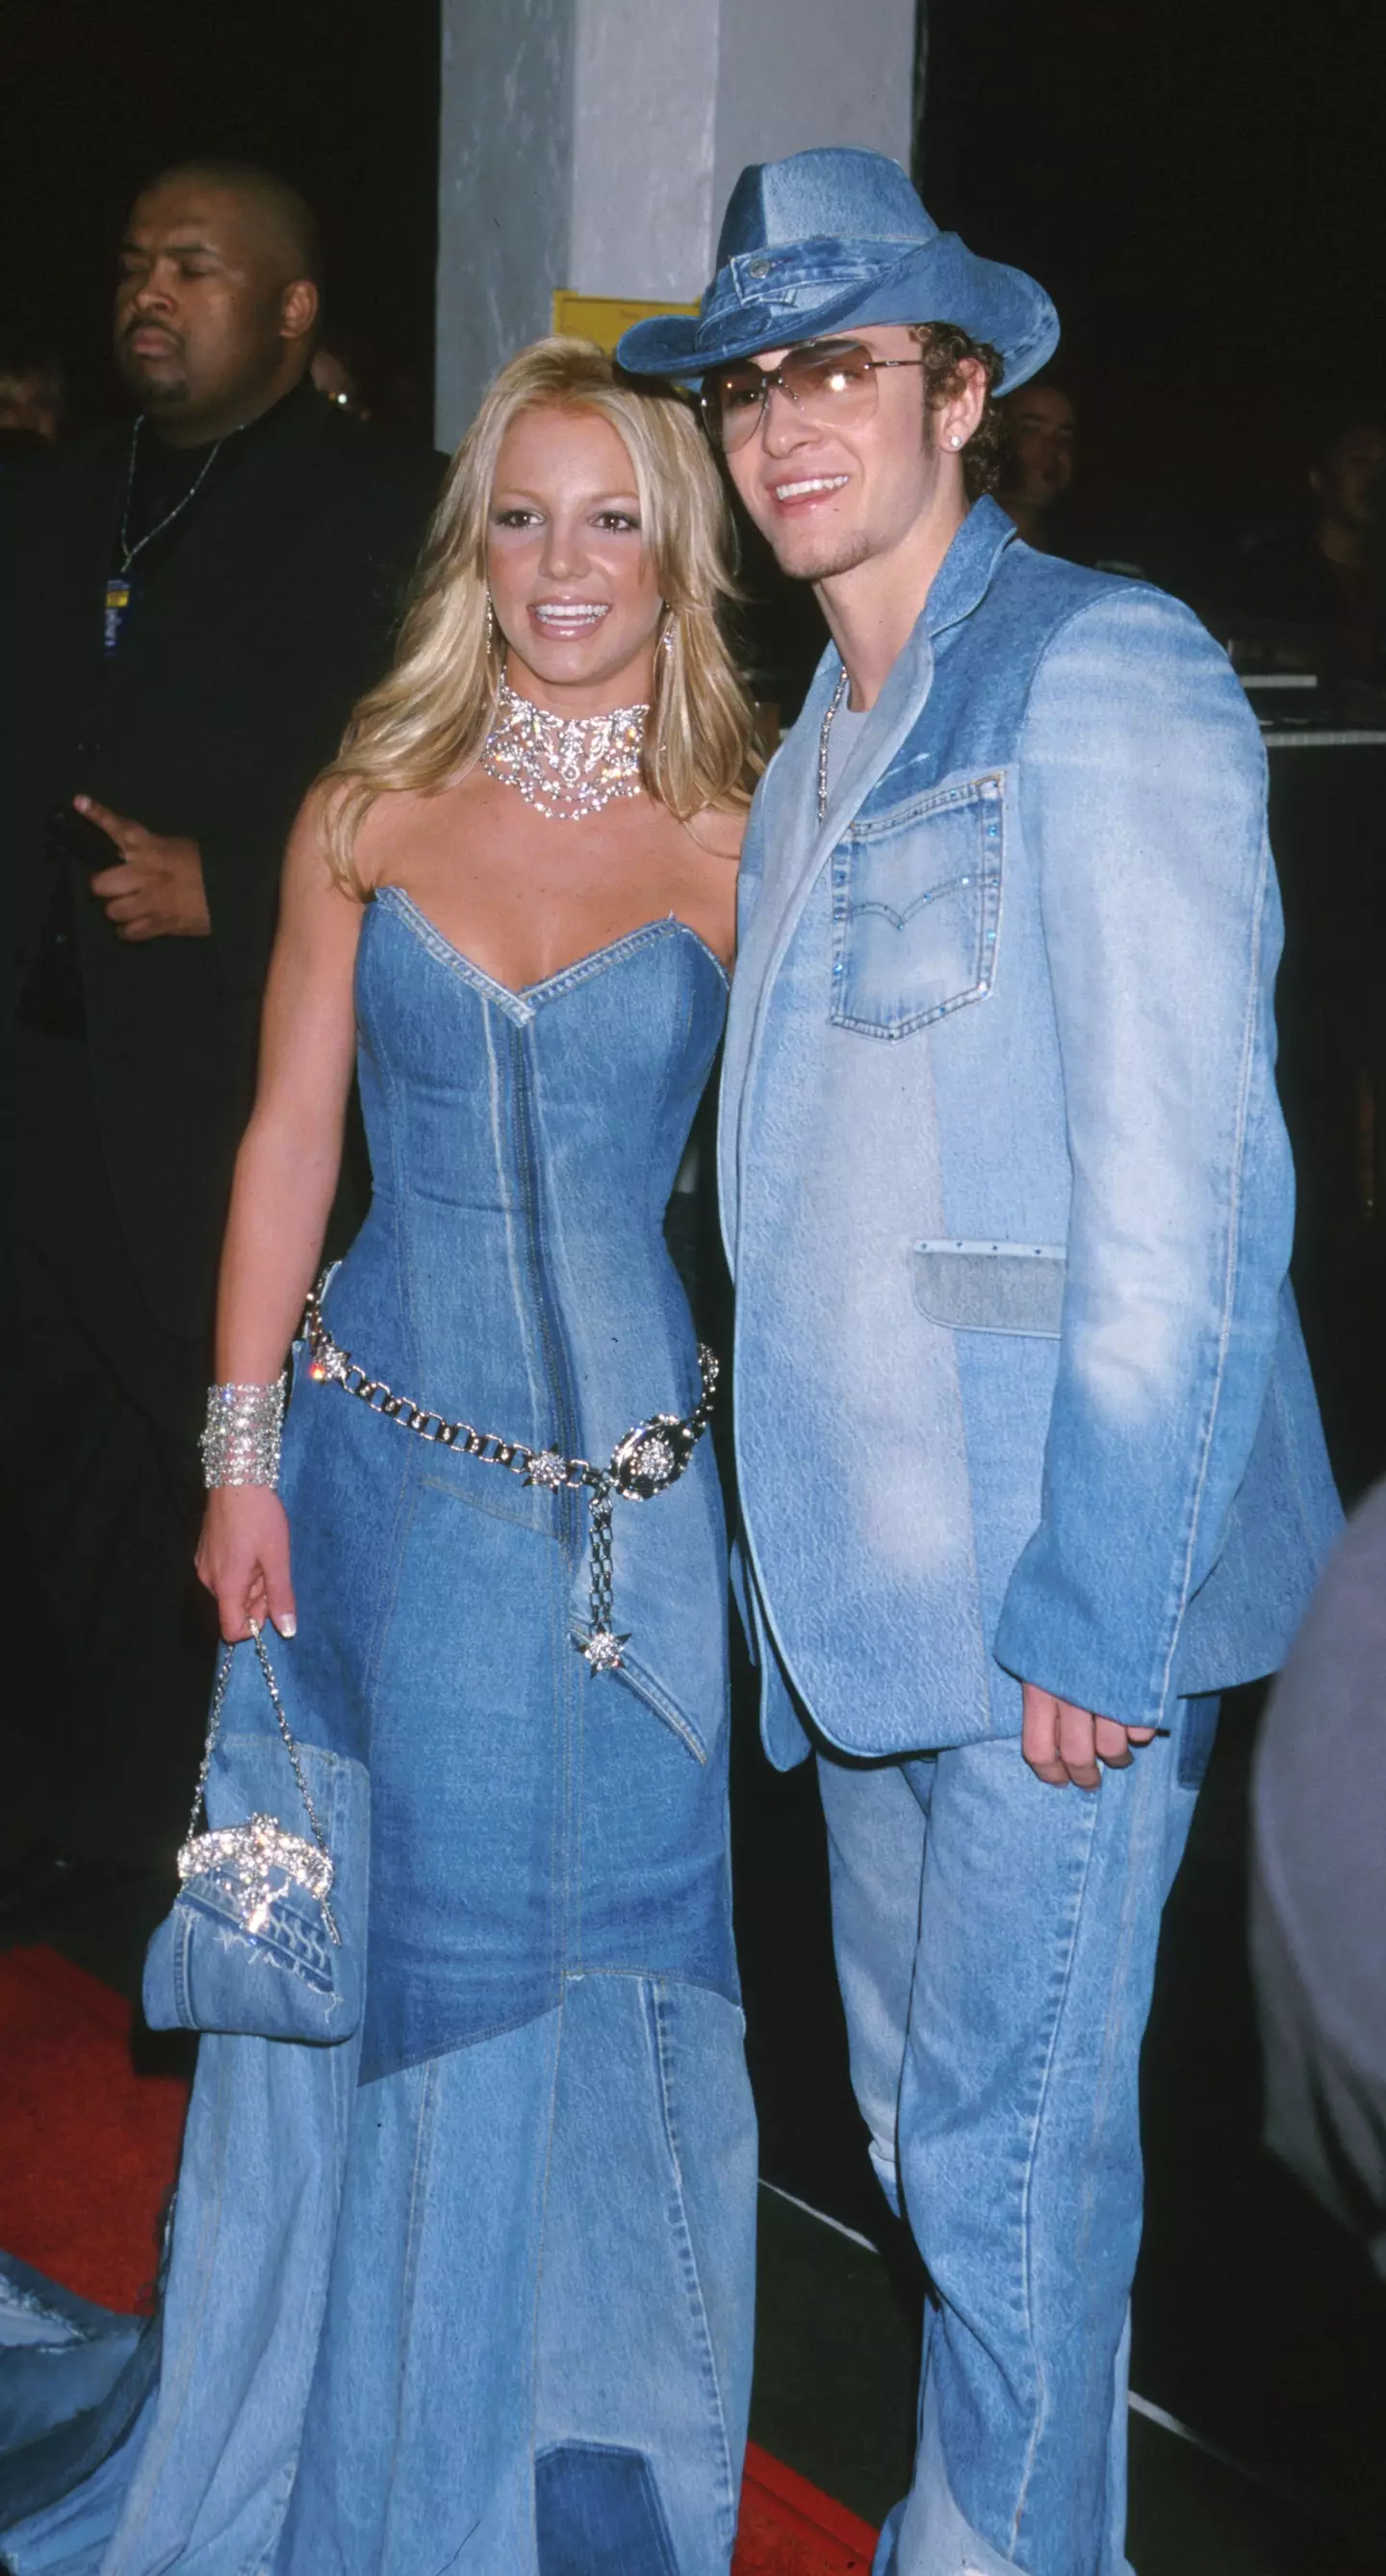 Justin Timberlake and Britney Spears dated from 1998 to 2002.